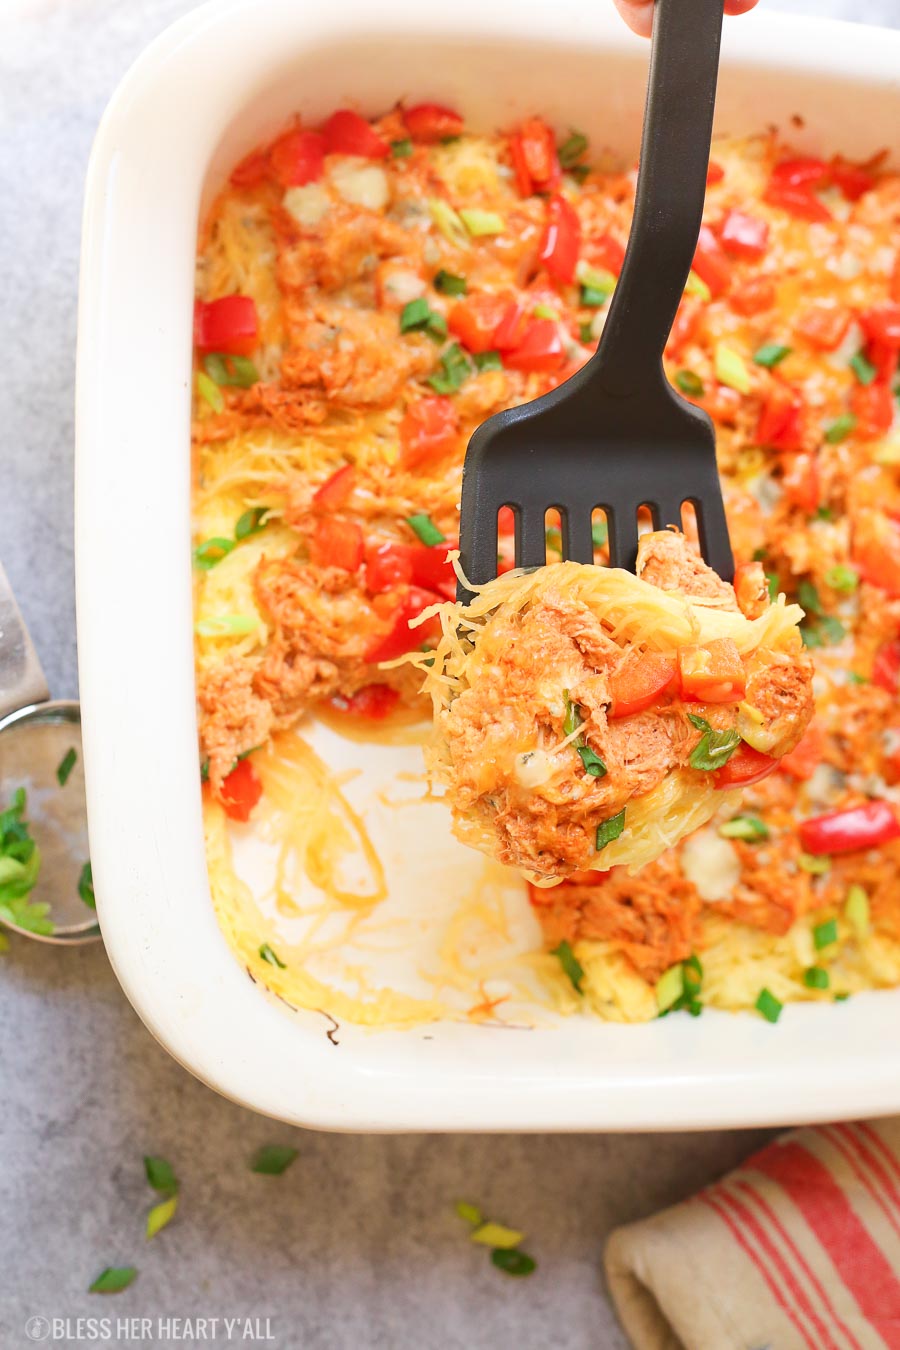 Skinny buffalo chicken spaghetti squash bake combines creamy flavor-packed buffalo chicken with fresh veggies and blue cheese crumbles all on a bed of spaghetti squash!